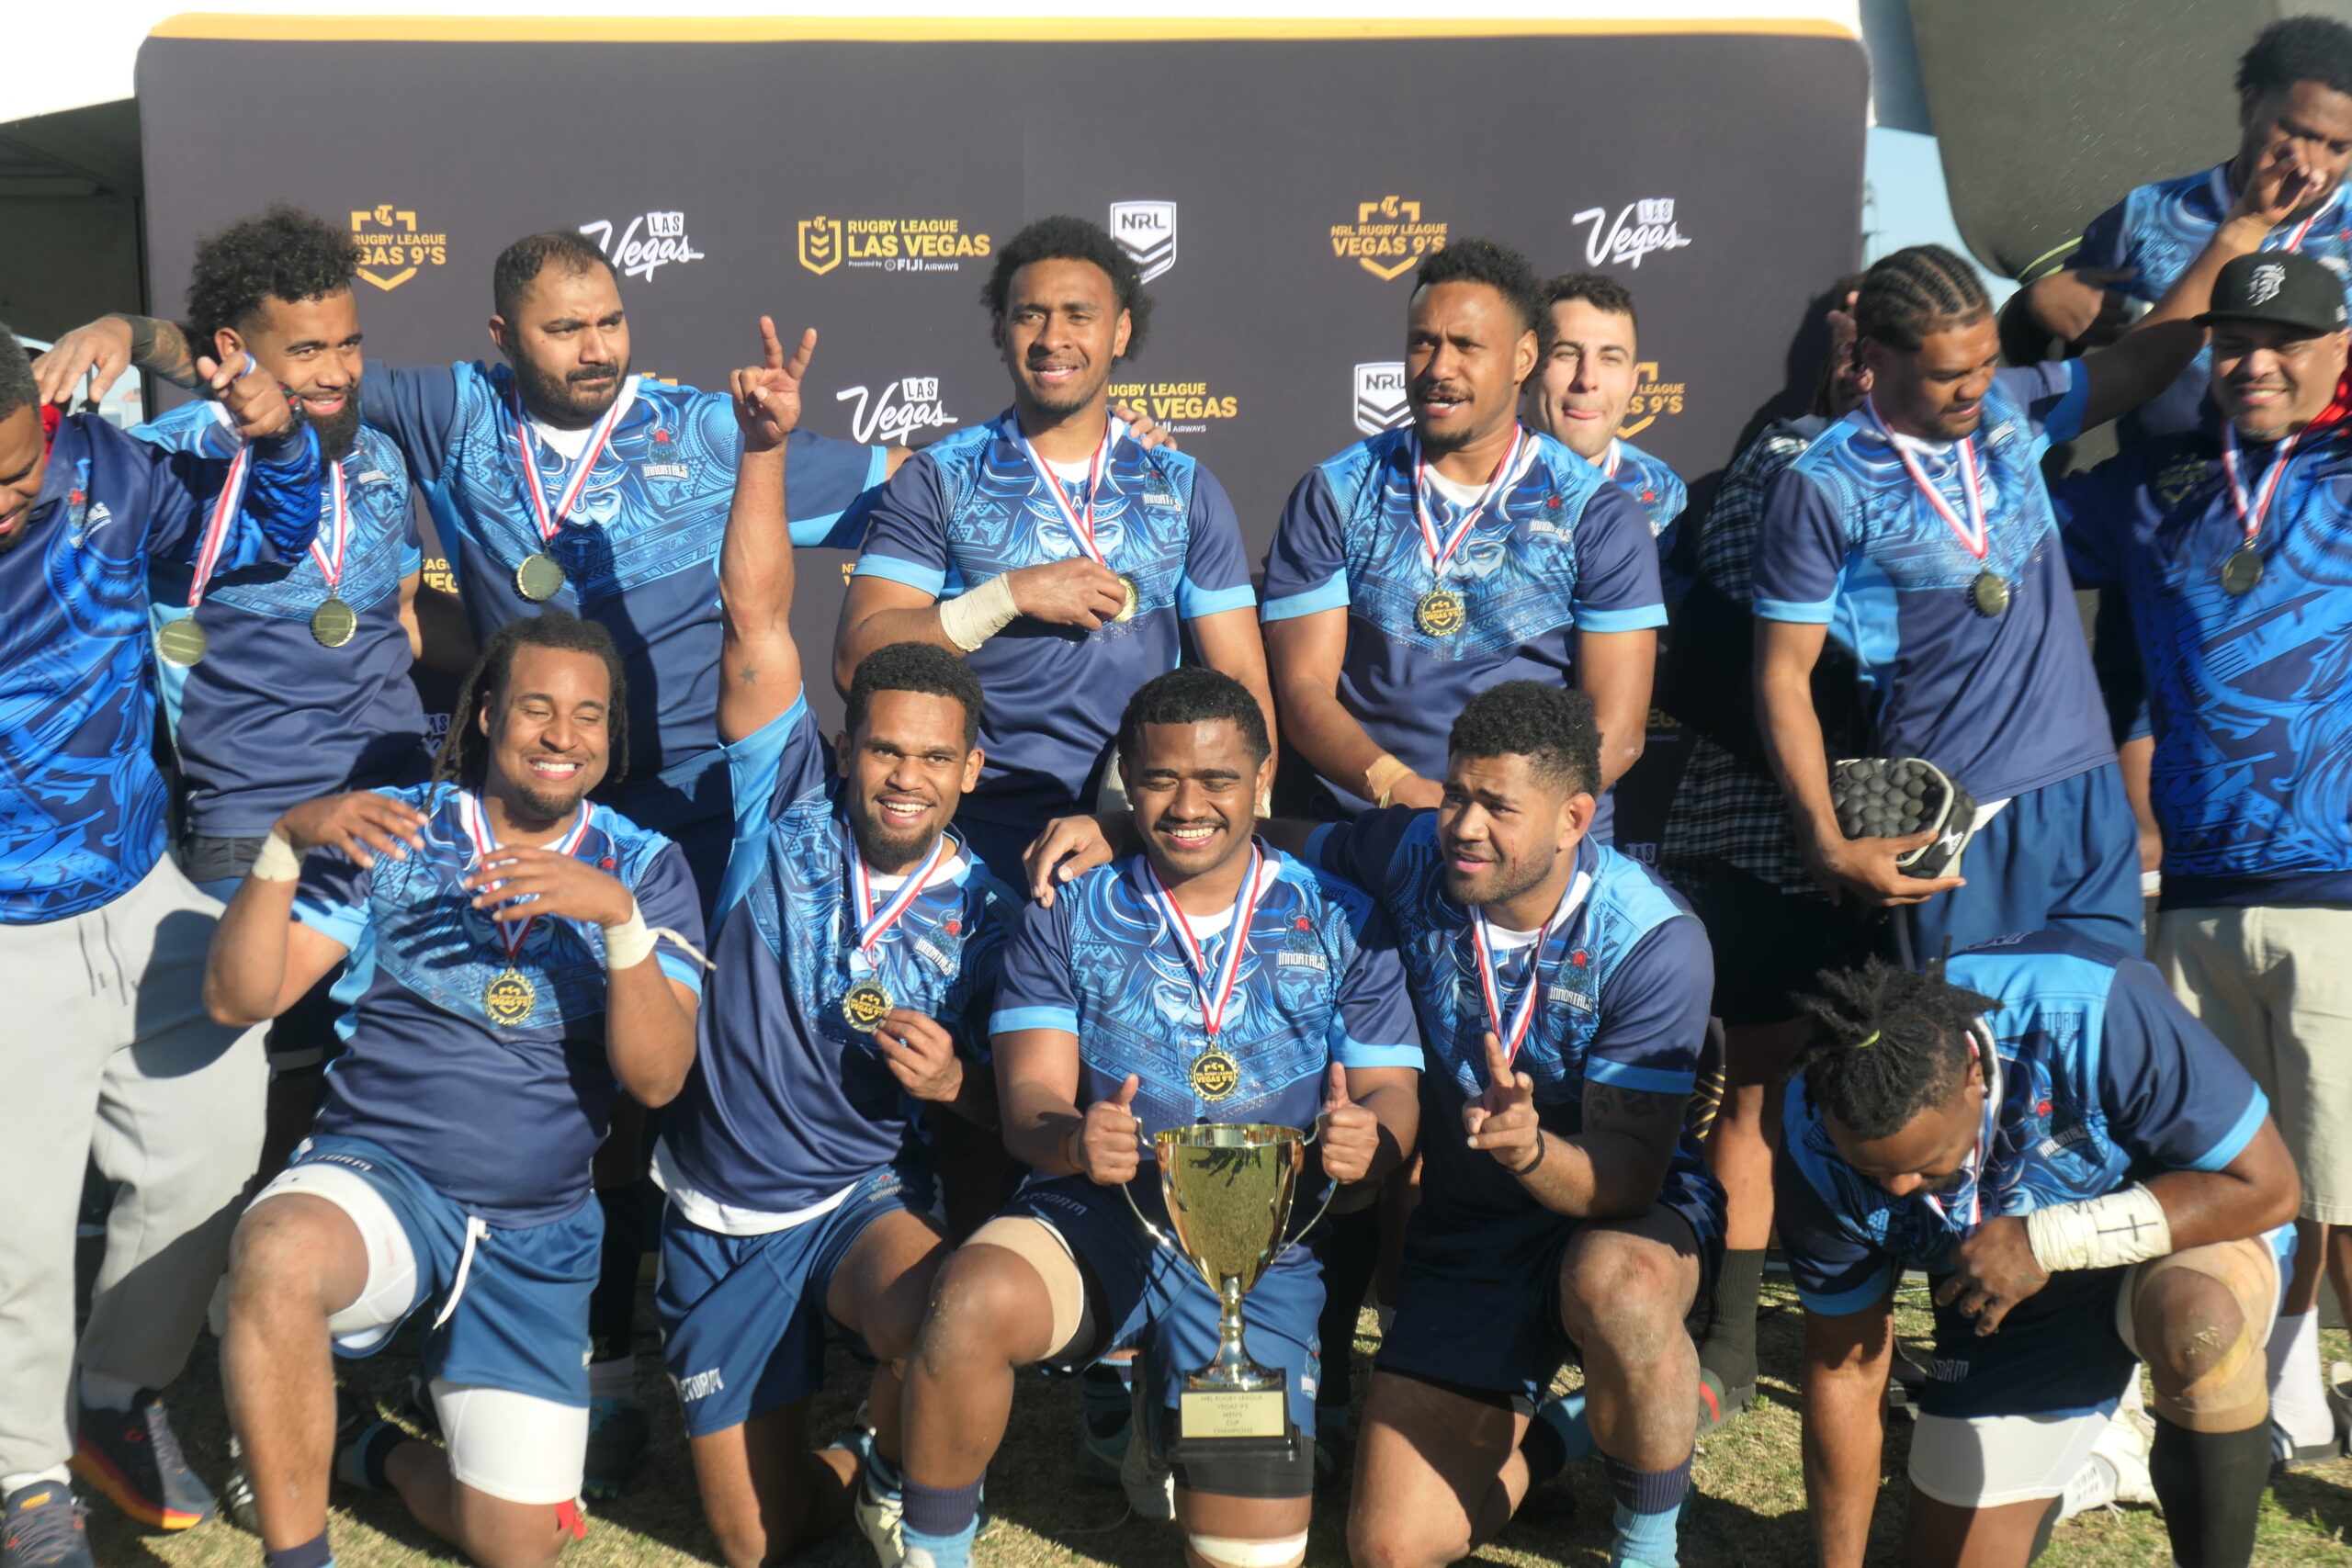 Another example of second generation expansion as Fiji-focused Immortals take out Nines